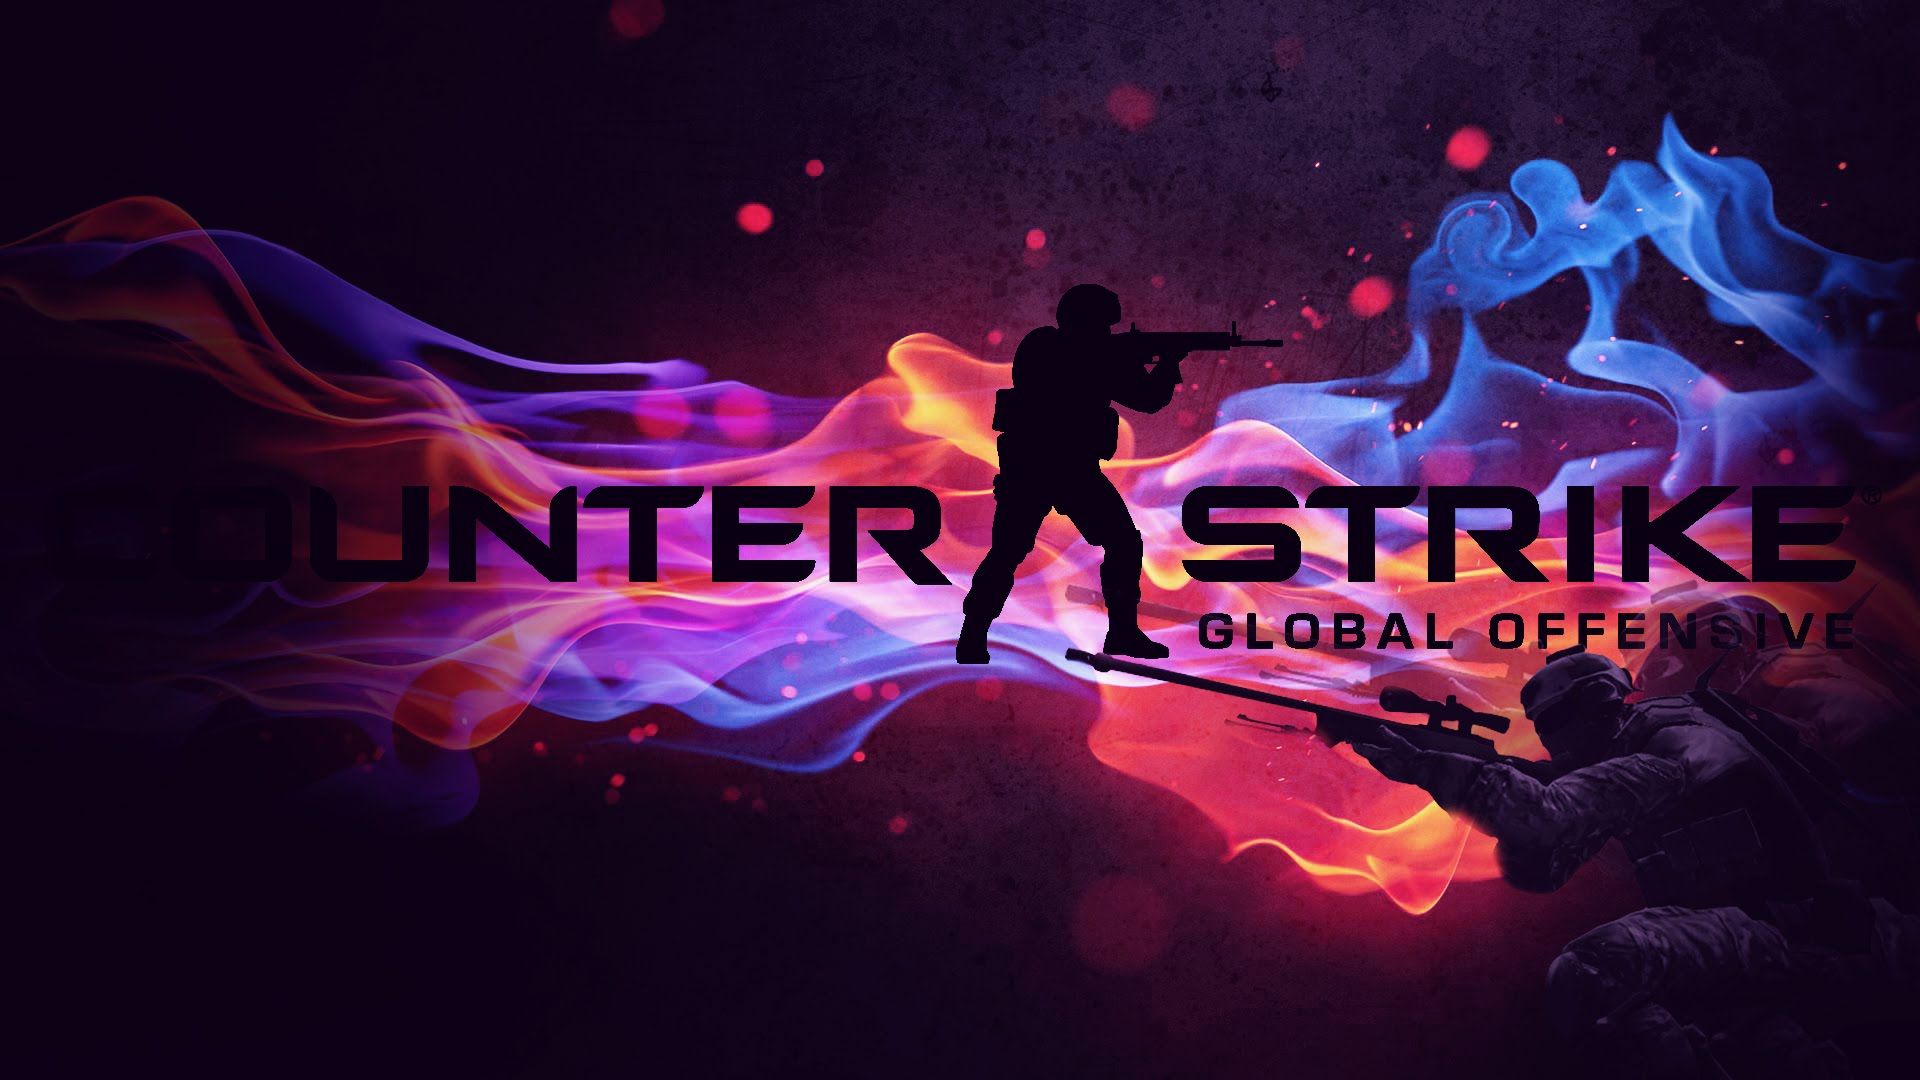 Counter-Strike: Global Offensive | Wallpaper - YouTube